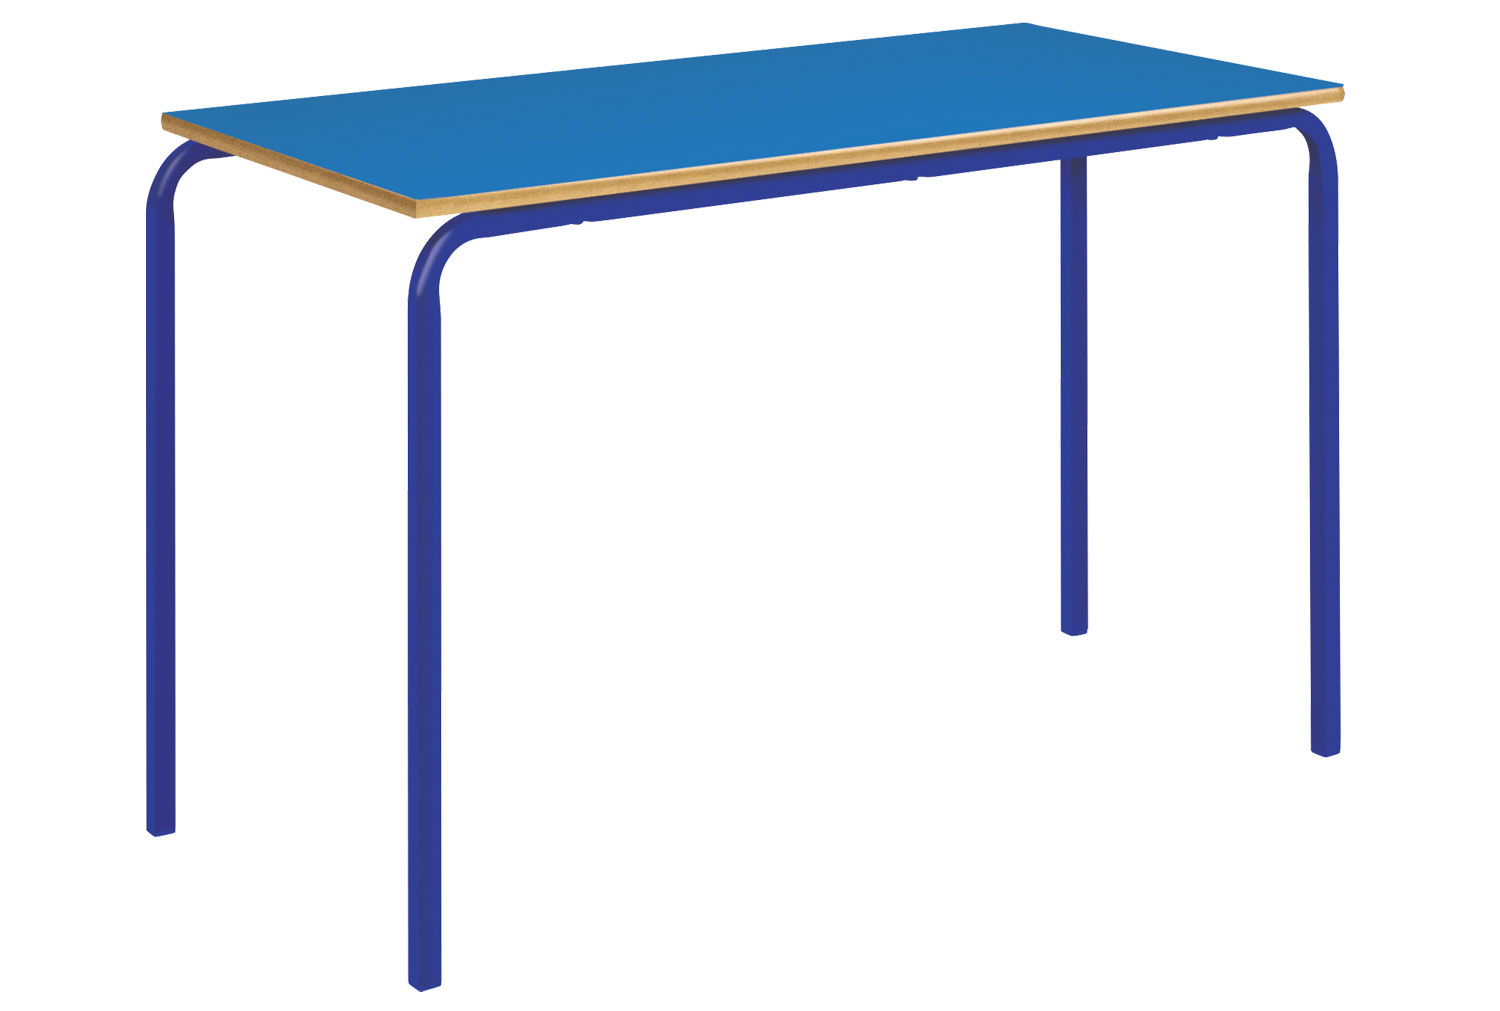 Qty 4 - Colour Edition Rectangular Crush Bent School Classroom Tables, 8-11 Years - 110wx55dx64h (cm), Yellow Frame, Yellow Top